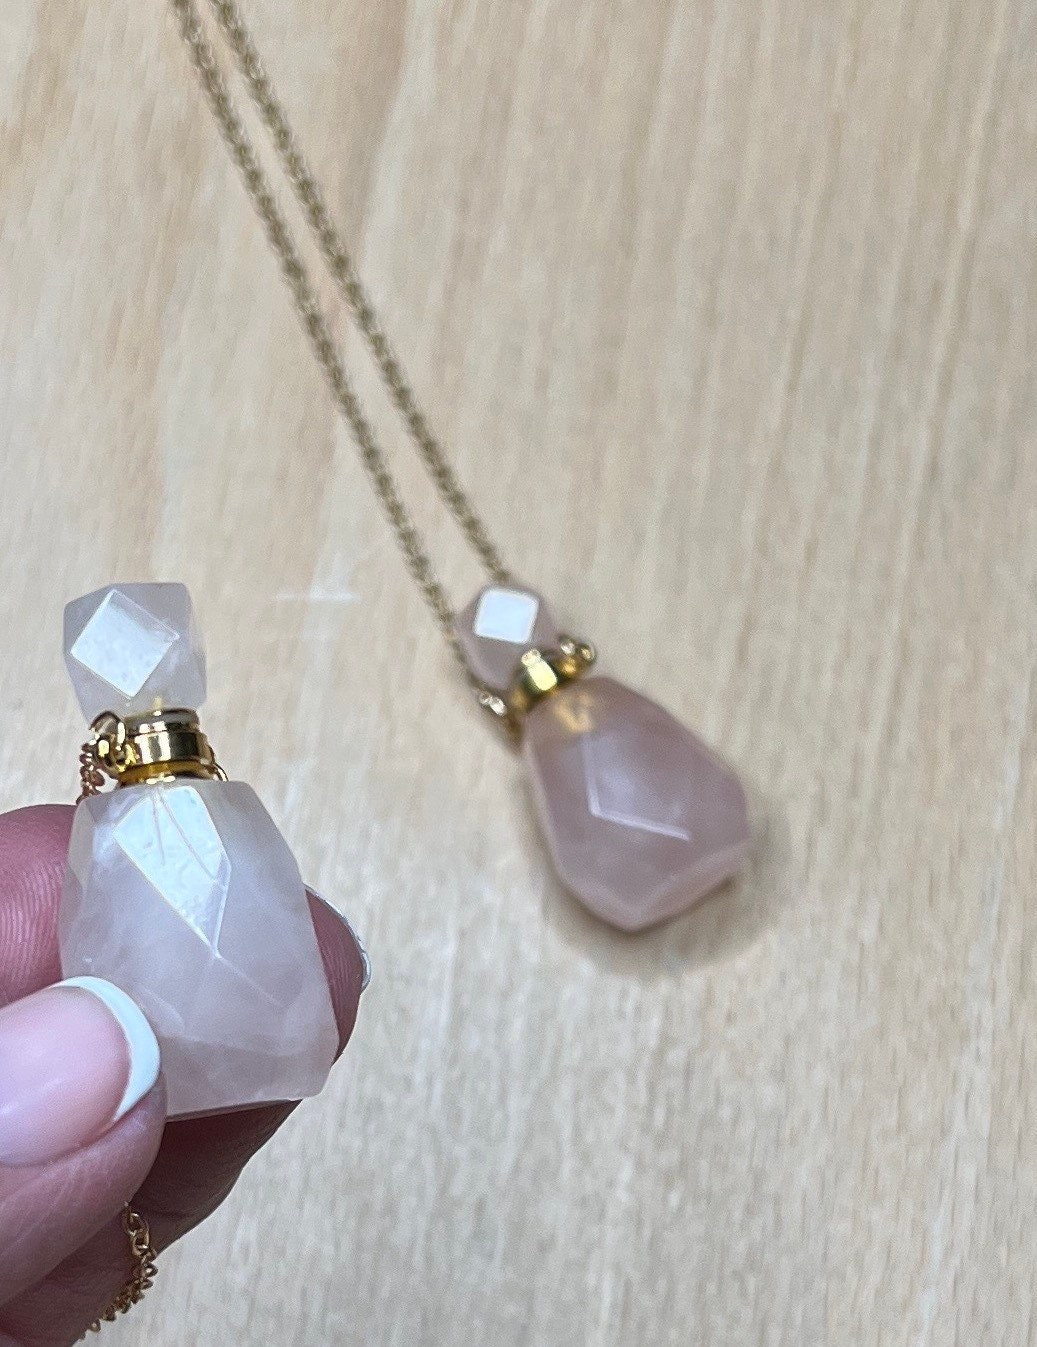 Rose Quartz Faceted Potion Bottle Necklace with screw on Top NCK-2658